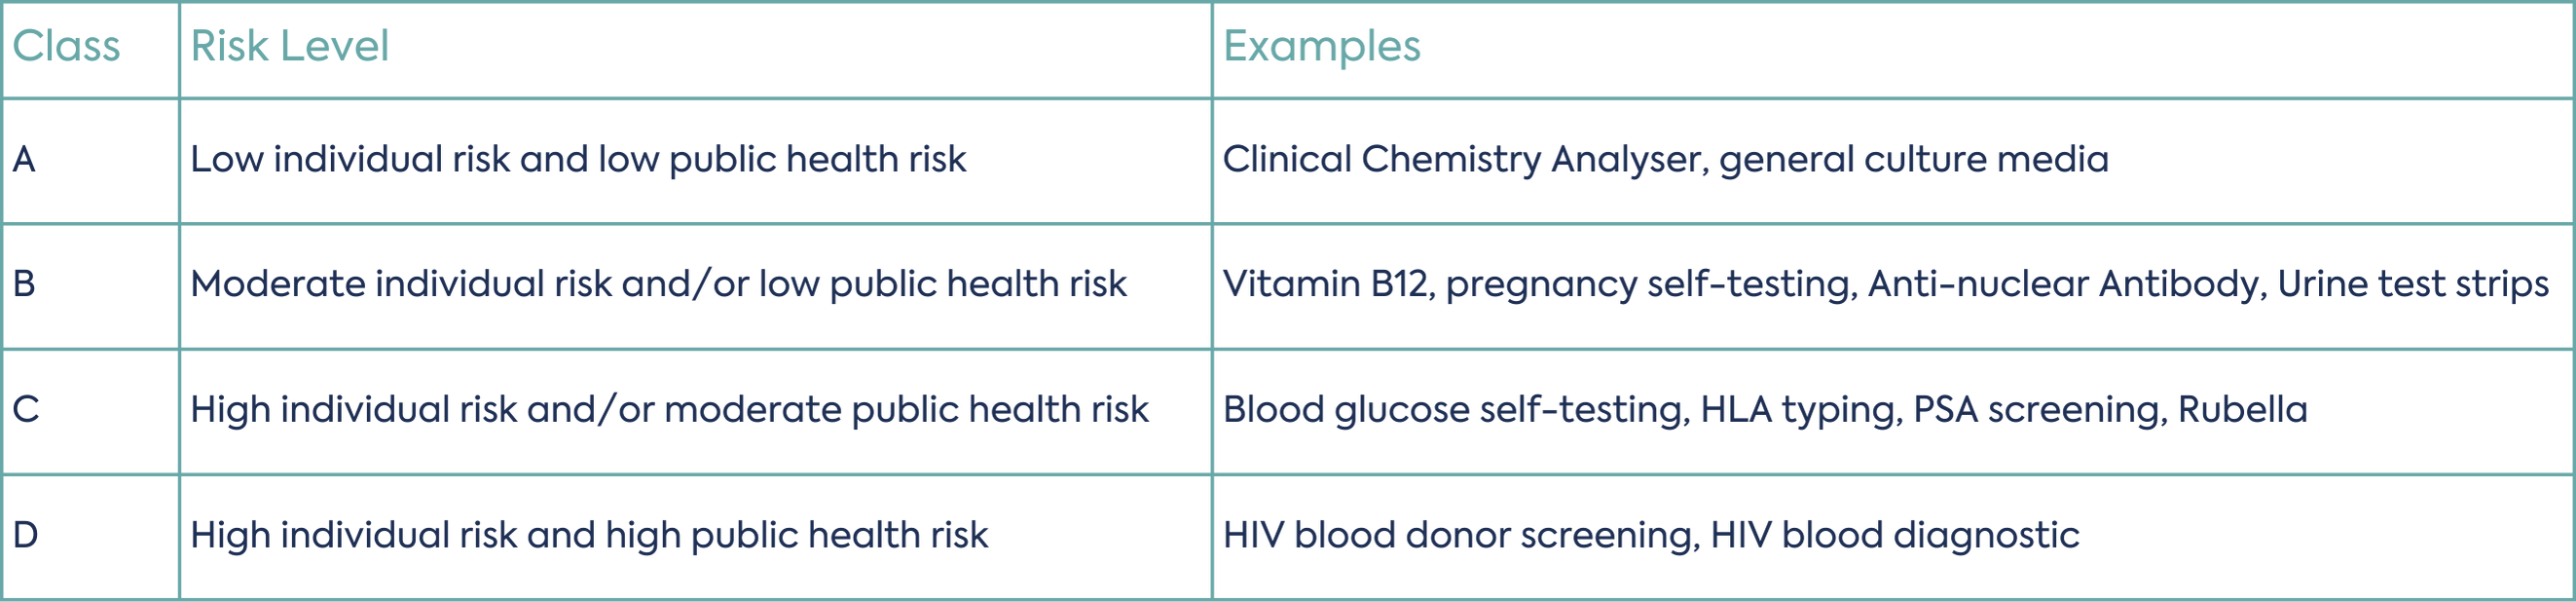 Class	Risk Level	Examples
A	Low individual risk and low public health risk	"Clinical Chemistry Analyser, general culture media"
B	Moderate individual risk and/or low public health risk	"Vitamin B12, pregnancy self-testing, Anti-nuclear Antibody, Urine test strips"
C	High individual risk and/or moderate public health risk	"Blood glucose self-testing, HLA typing, PSA screening, Rubella"
D	High individual risk and high public health risk	"HIV blood donor screening, HIV blood diagnostic"
